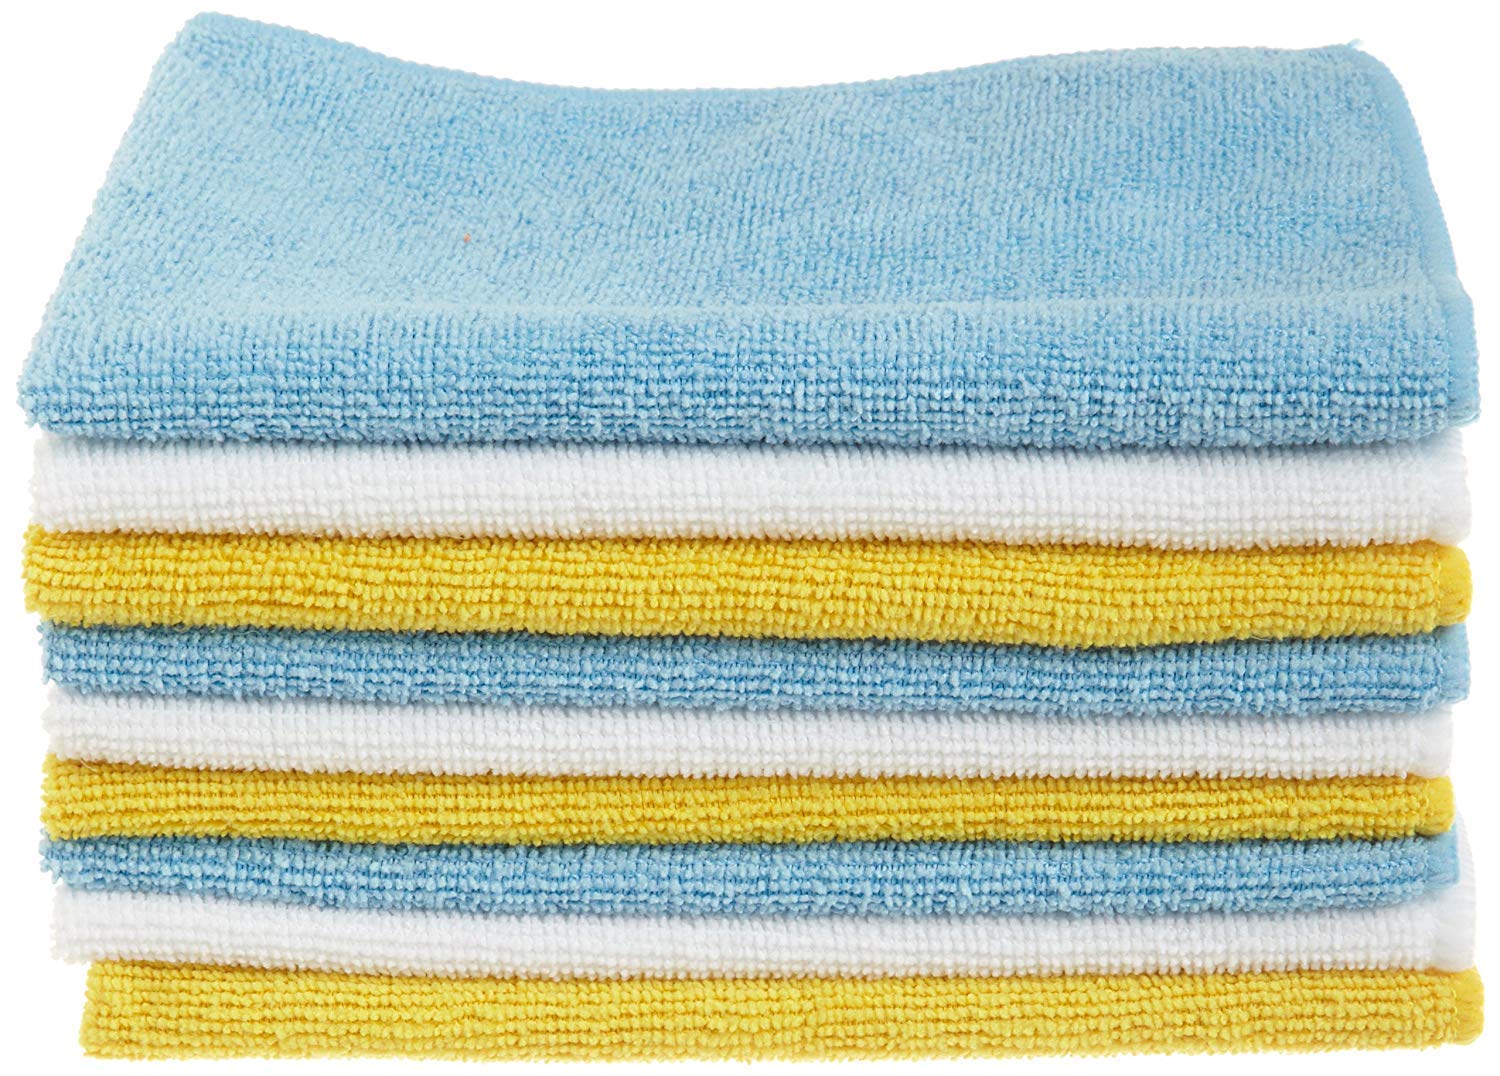 24-Pack 16" x 12" Amazon Basics Microfiber Cleaning Cloths (Blue/White/Yellow) $8.98 w/ S&S + Free Shipping w/ Prime on orders $35